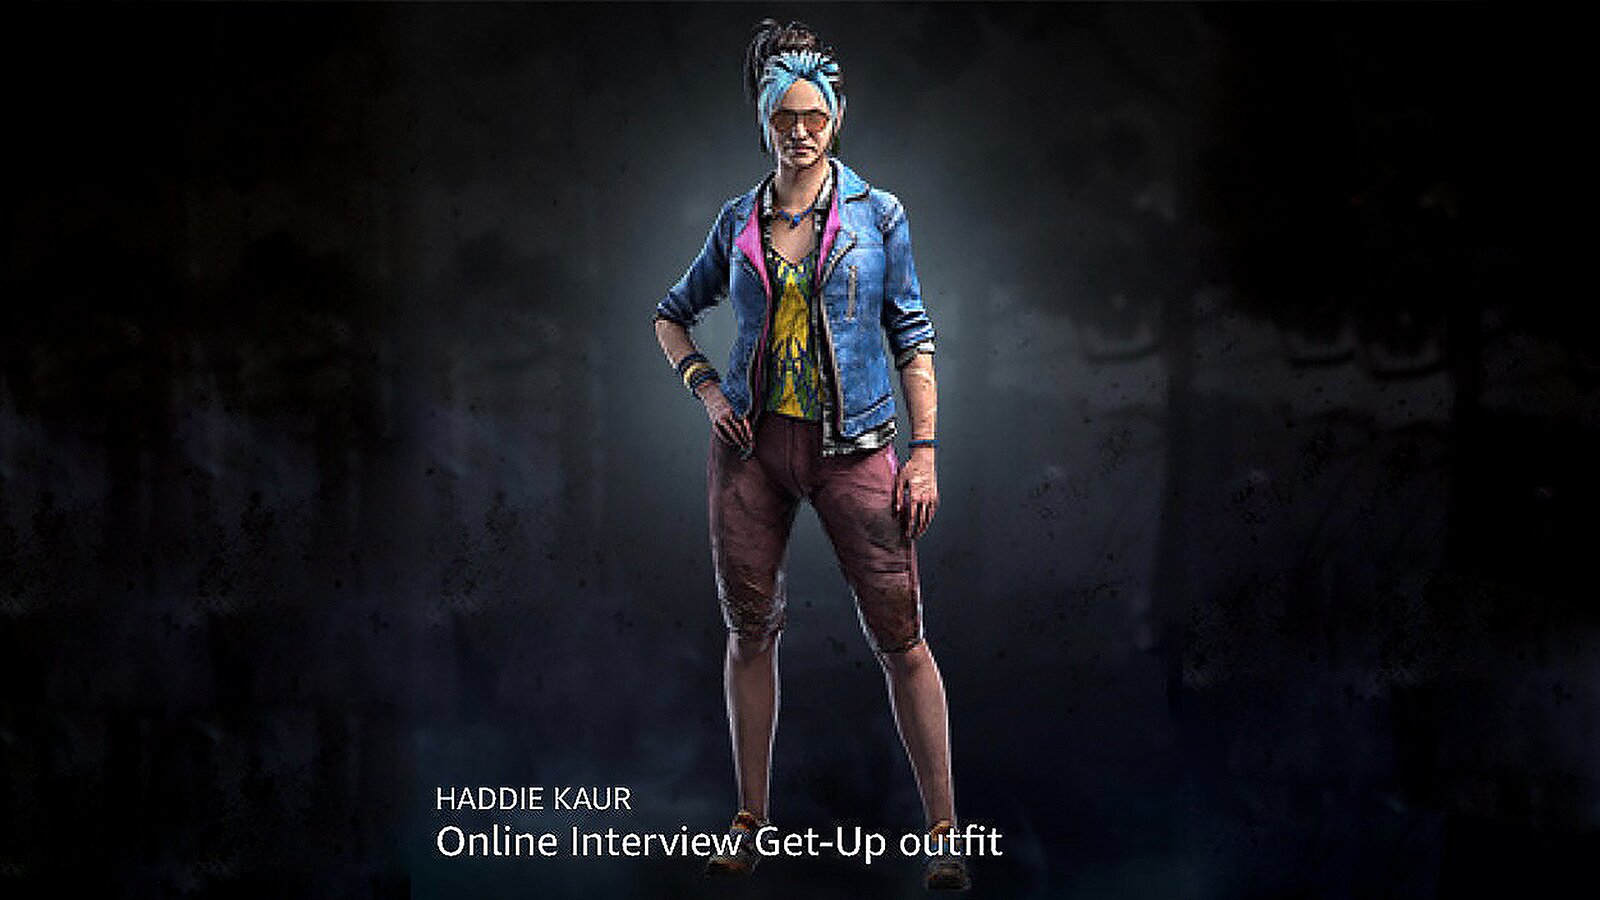 Dead by Daylight - Haddie Kaur Online Interview Get-Up outfit